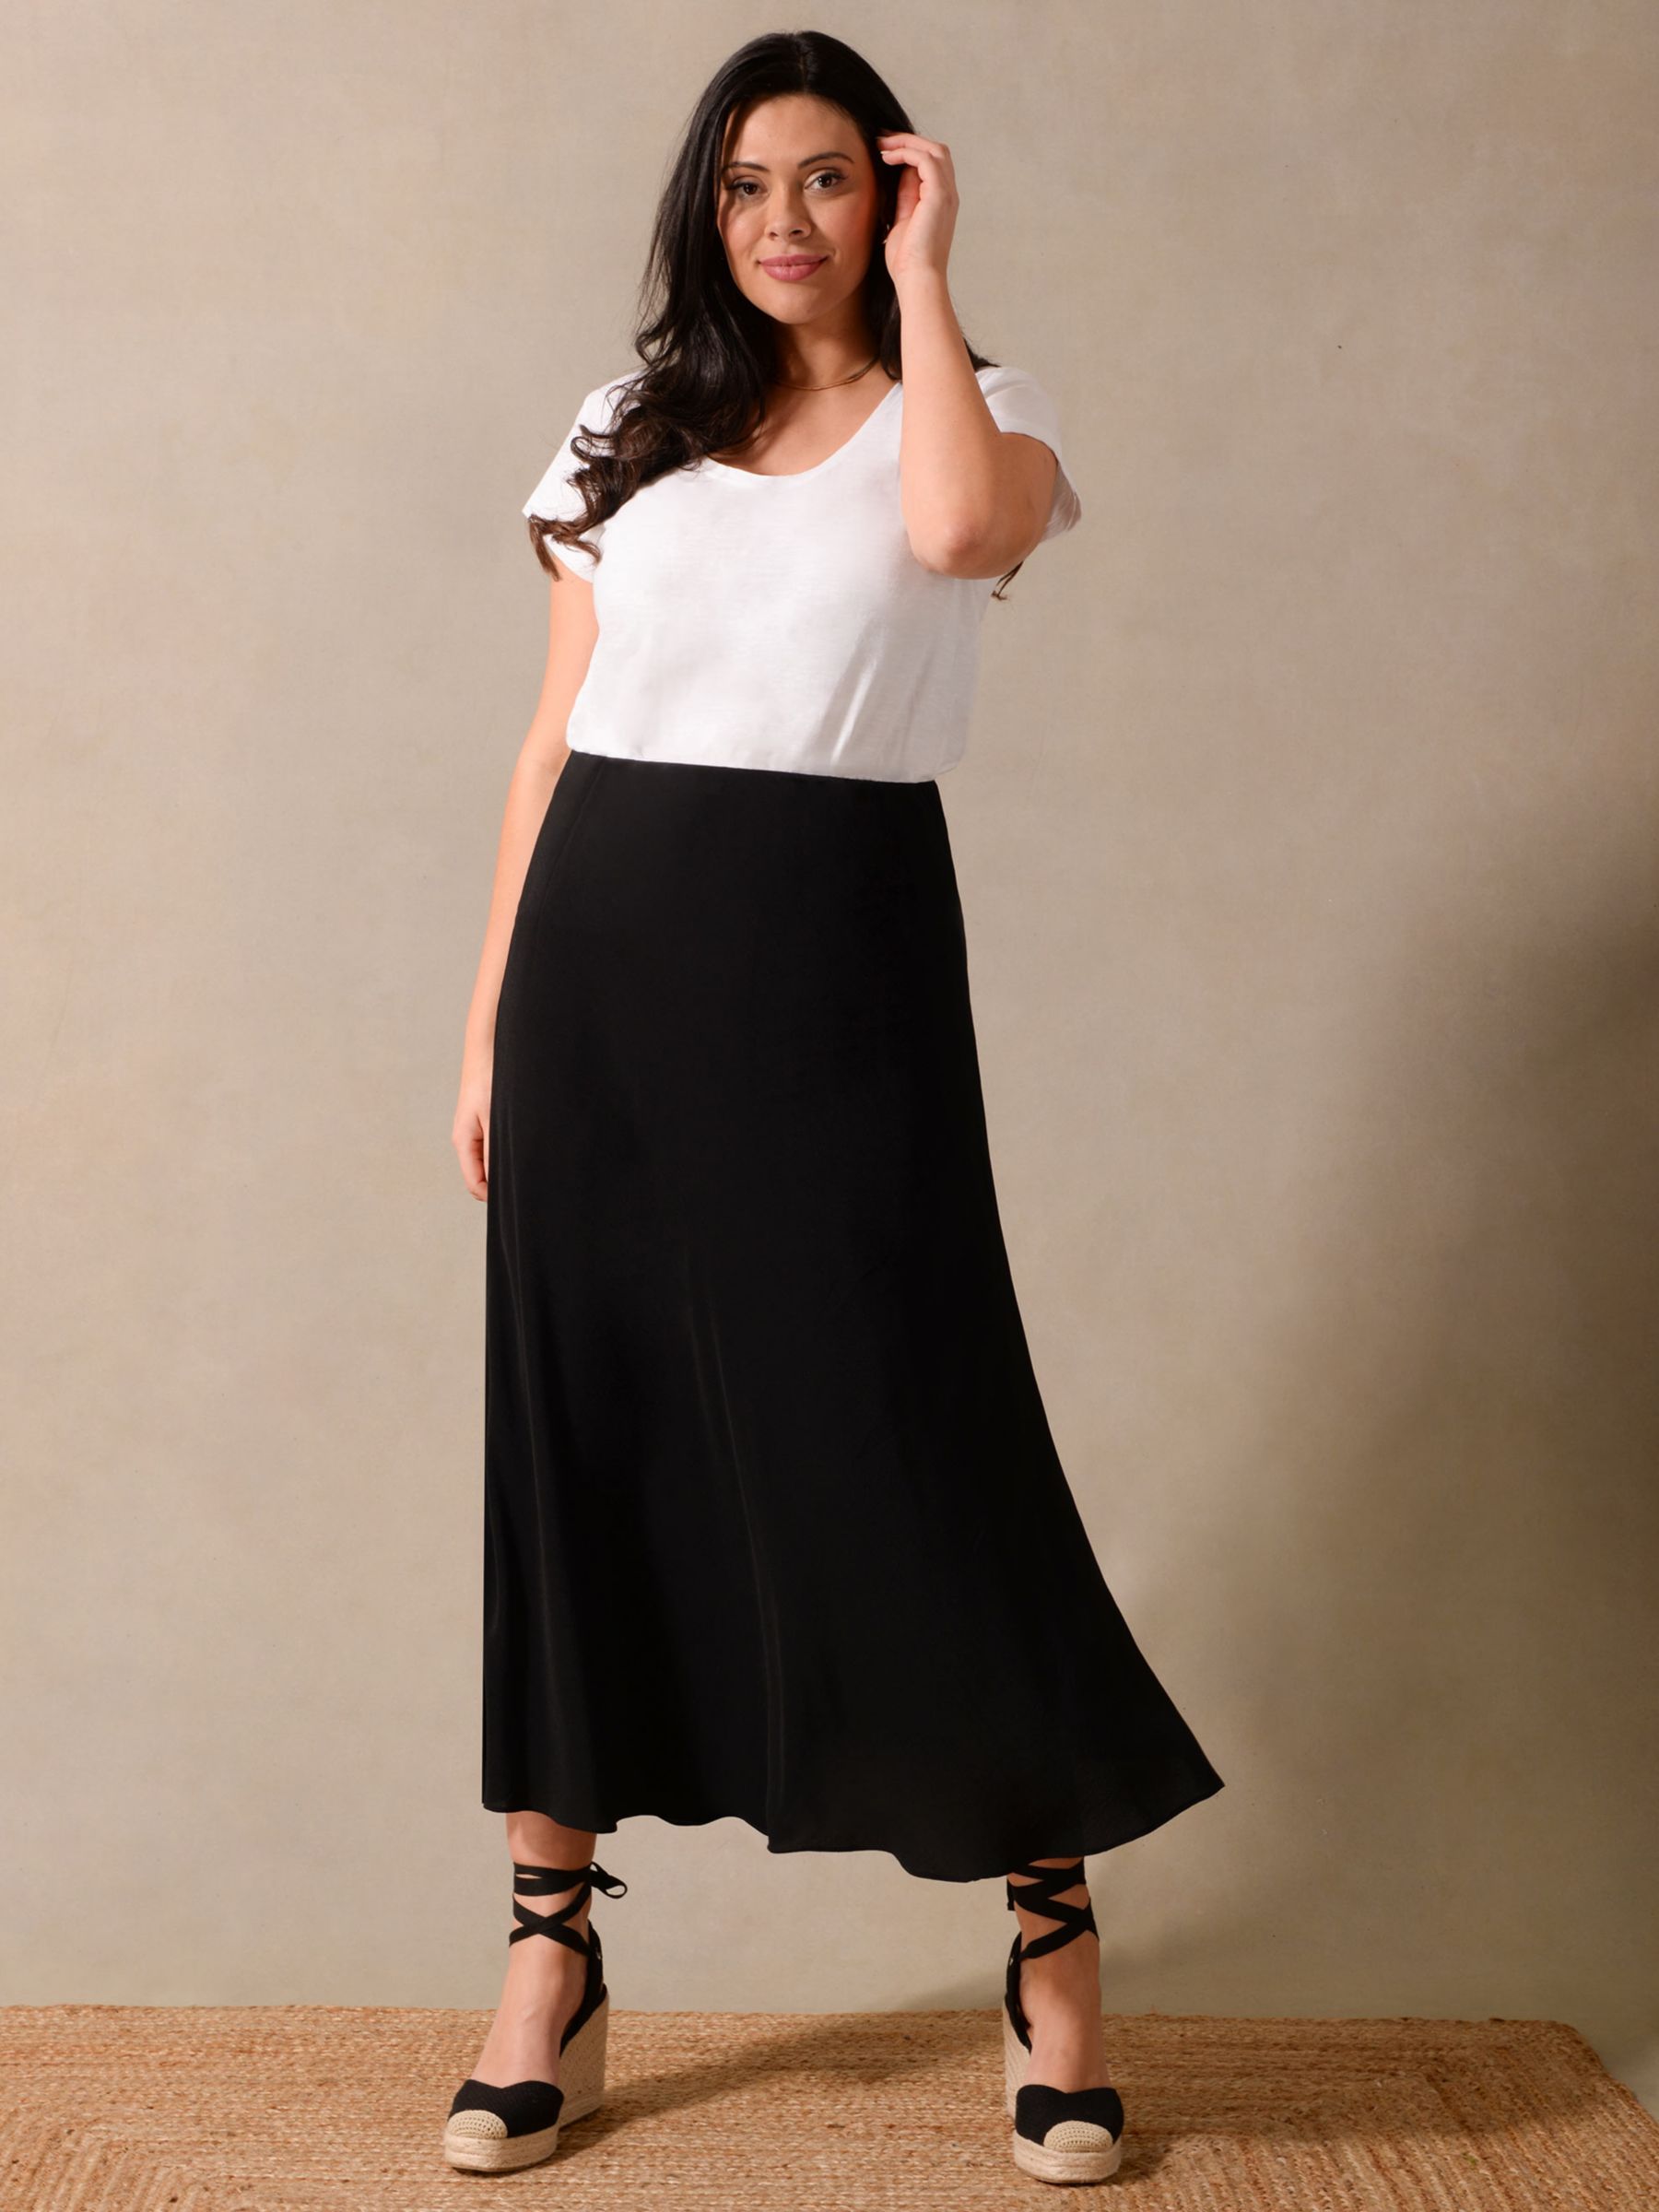 Live Unlimited Curve Chiffon Lined Wide Leg Trousers, Black at John Lewis &  Partners